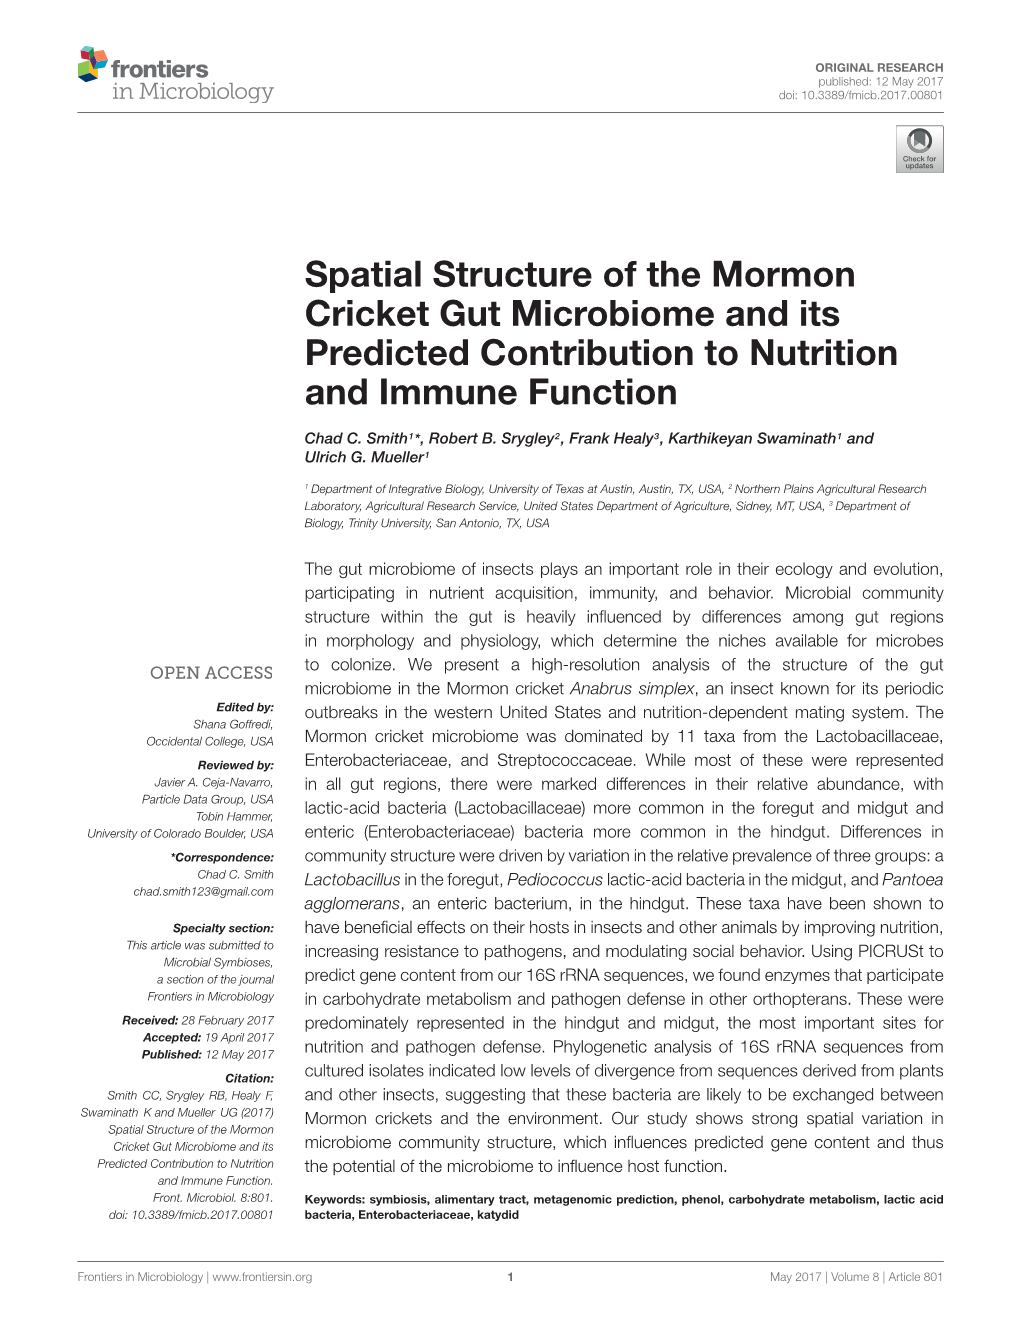 Spatial Structure of the Mormon Cricket Gut Microbiome and Its Predicted Contribution to Nutrition and Immune Function